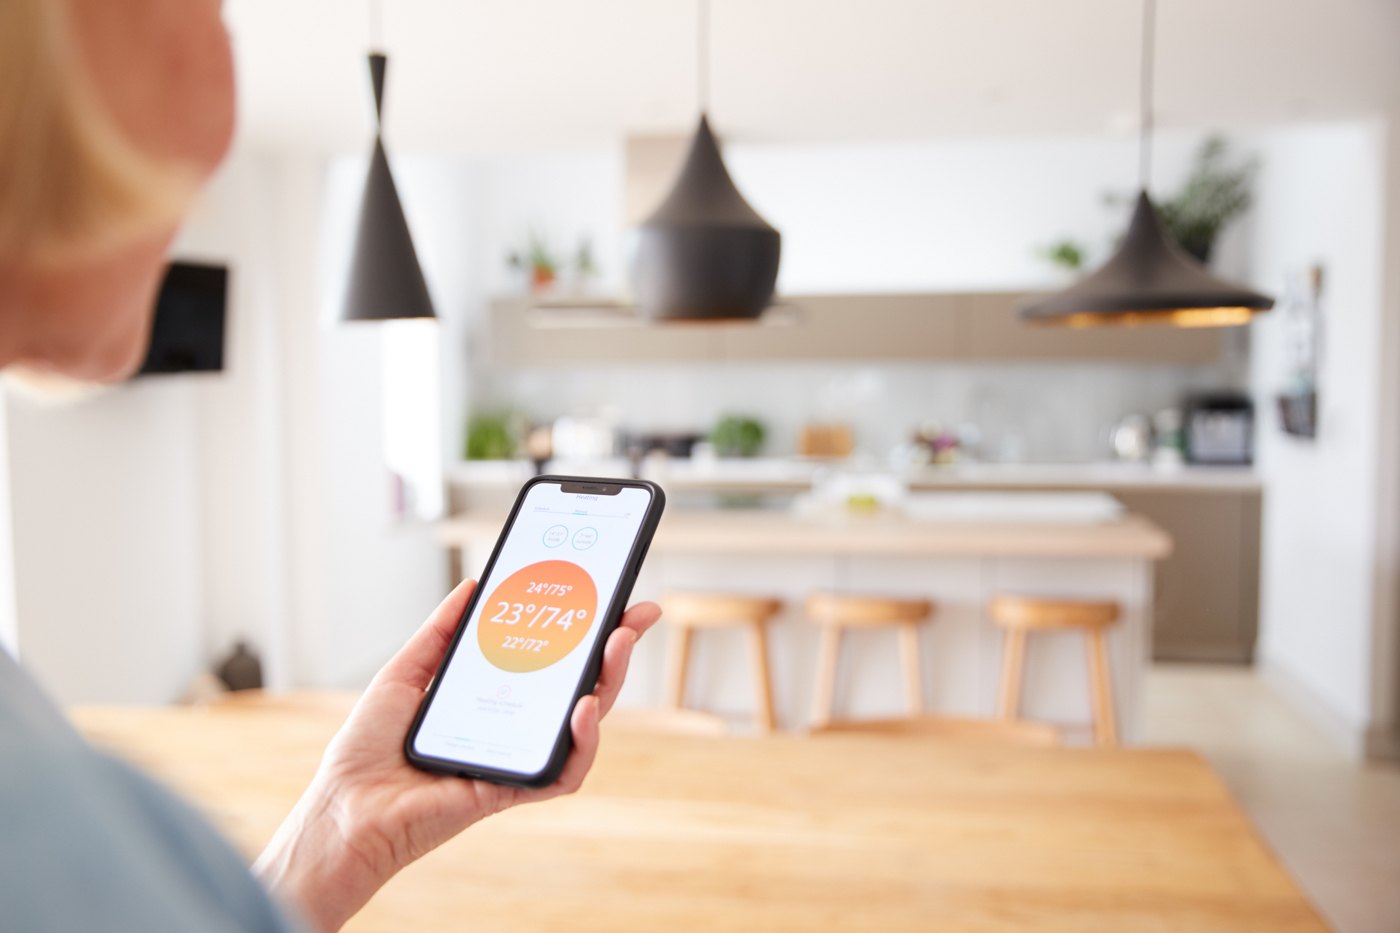 Lowering electricity costs Automate heating Home by App control 